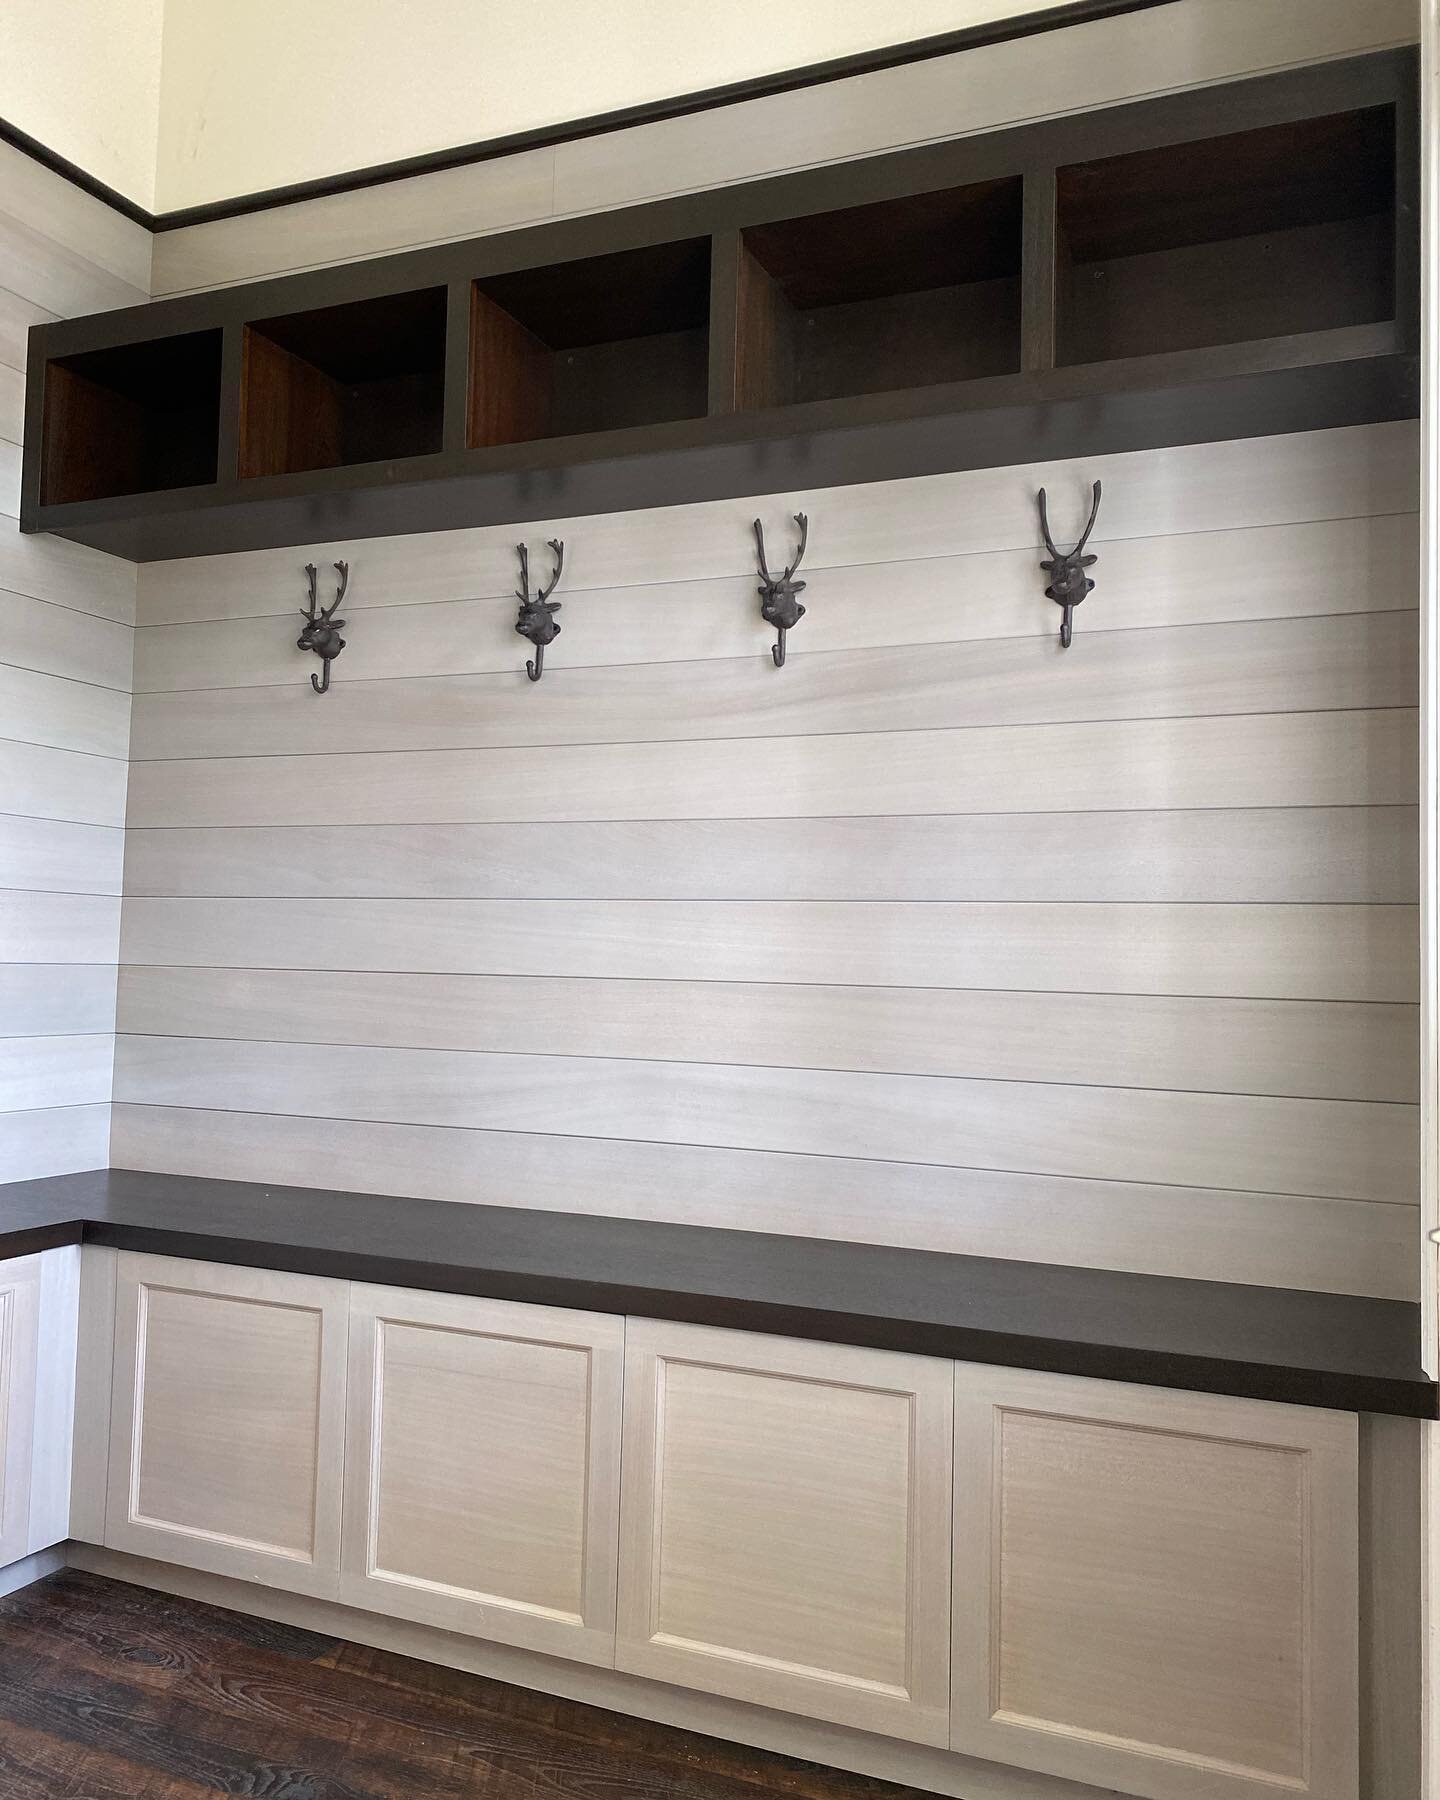 This mudroom offers the perfect combination of texture, color and function. We are loving the simple design that helps keep the clutter of daily life organized. 
&bull;
&bull;
&bull;
&bull;
&bull;
&bull;
&bull;
&bull;
&bull;
&bull;
&bull;
&bull;
&bul